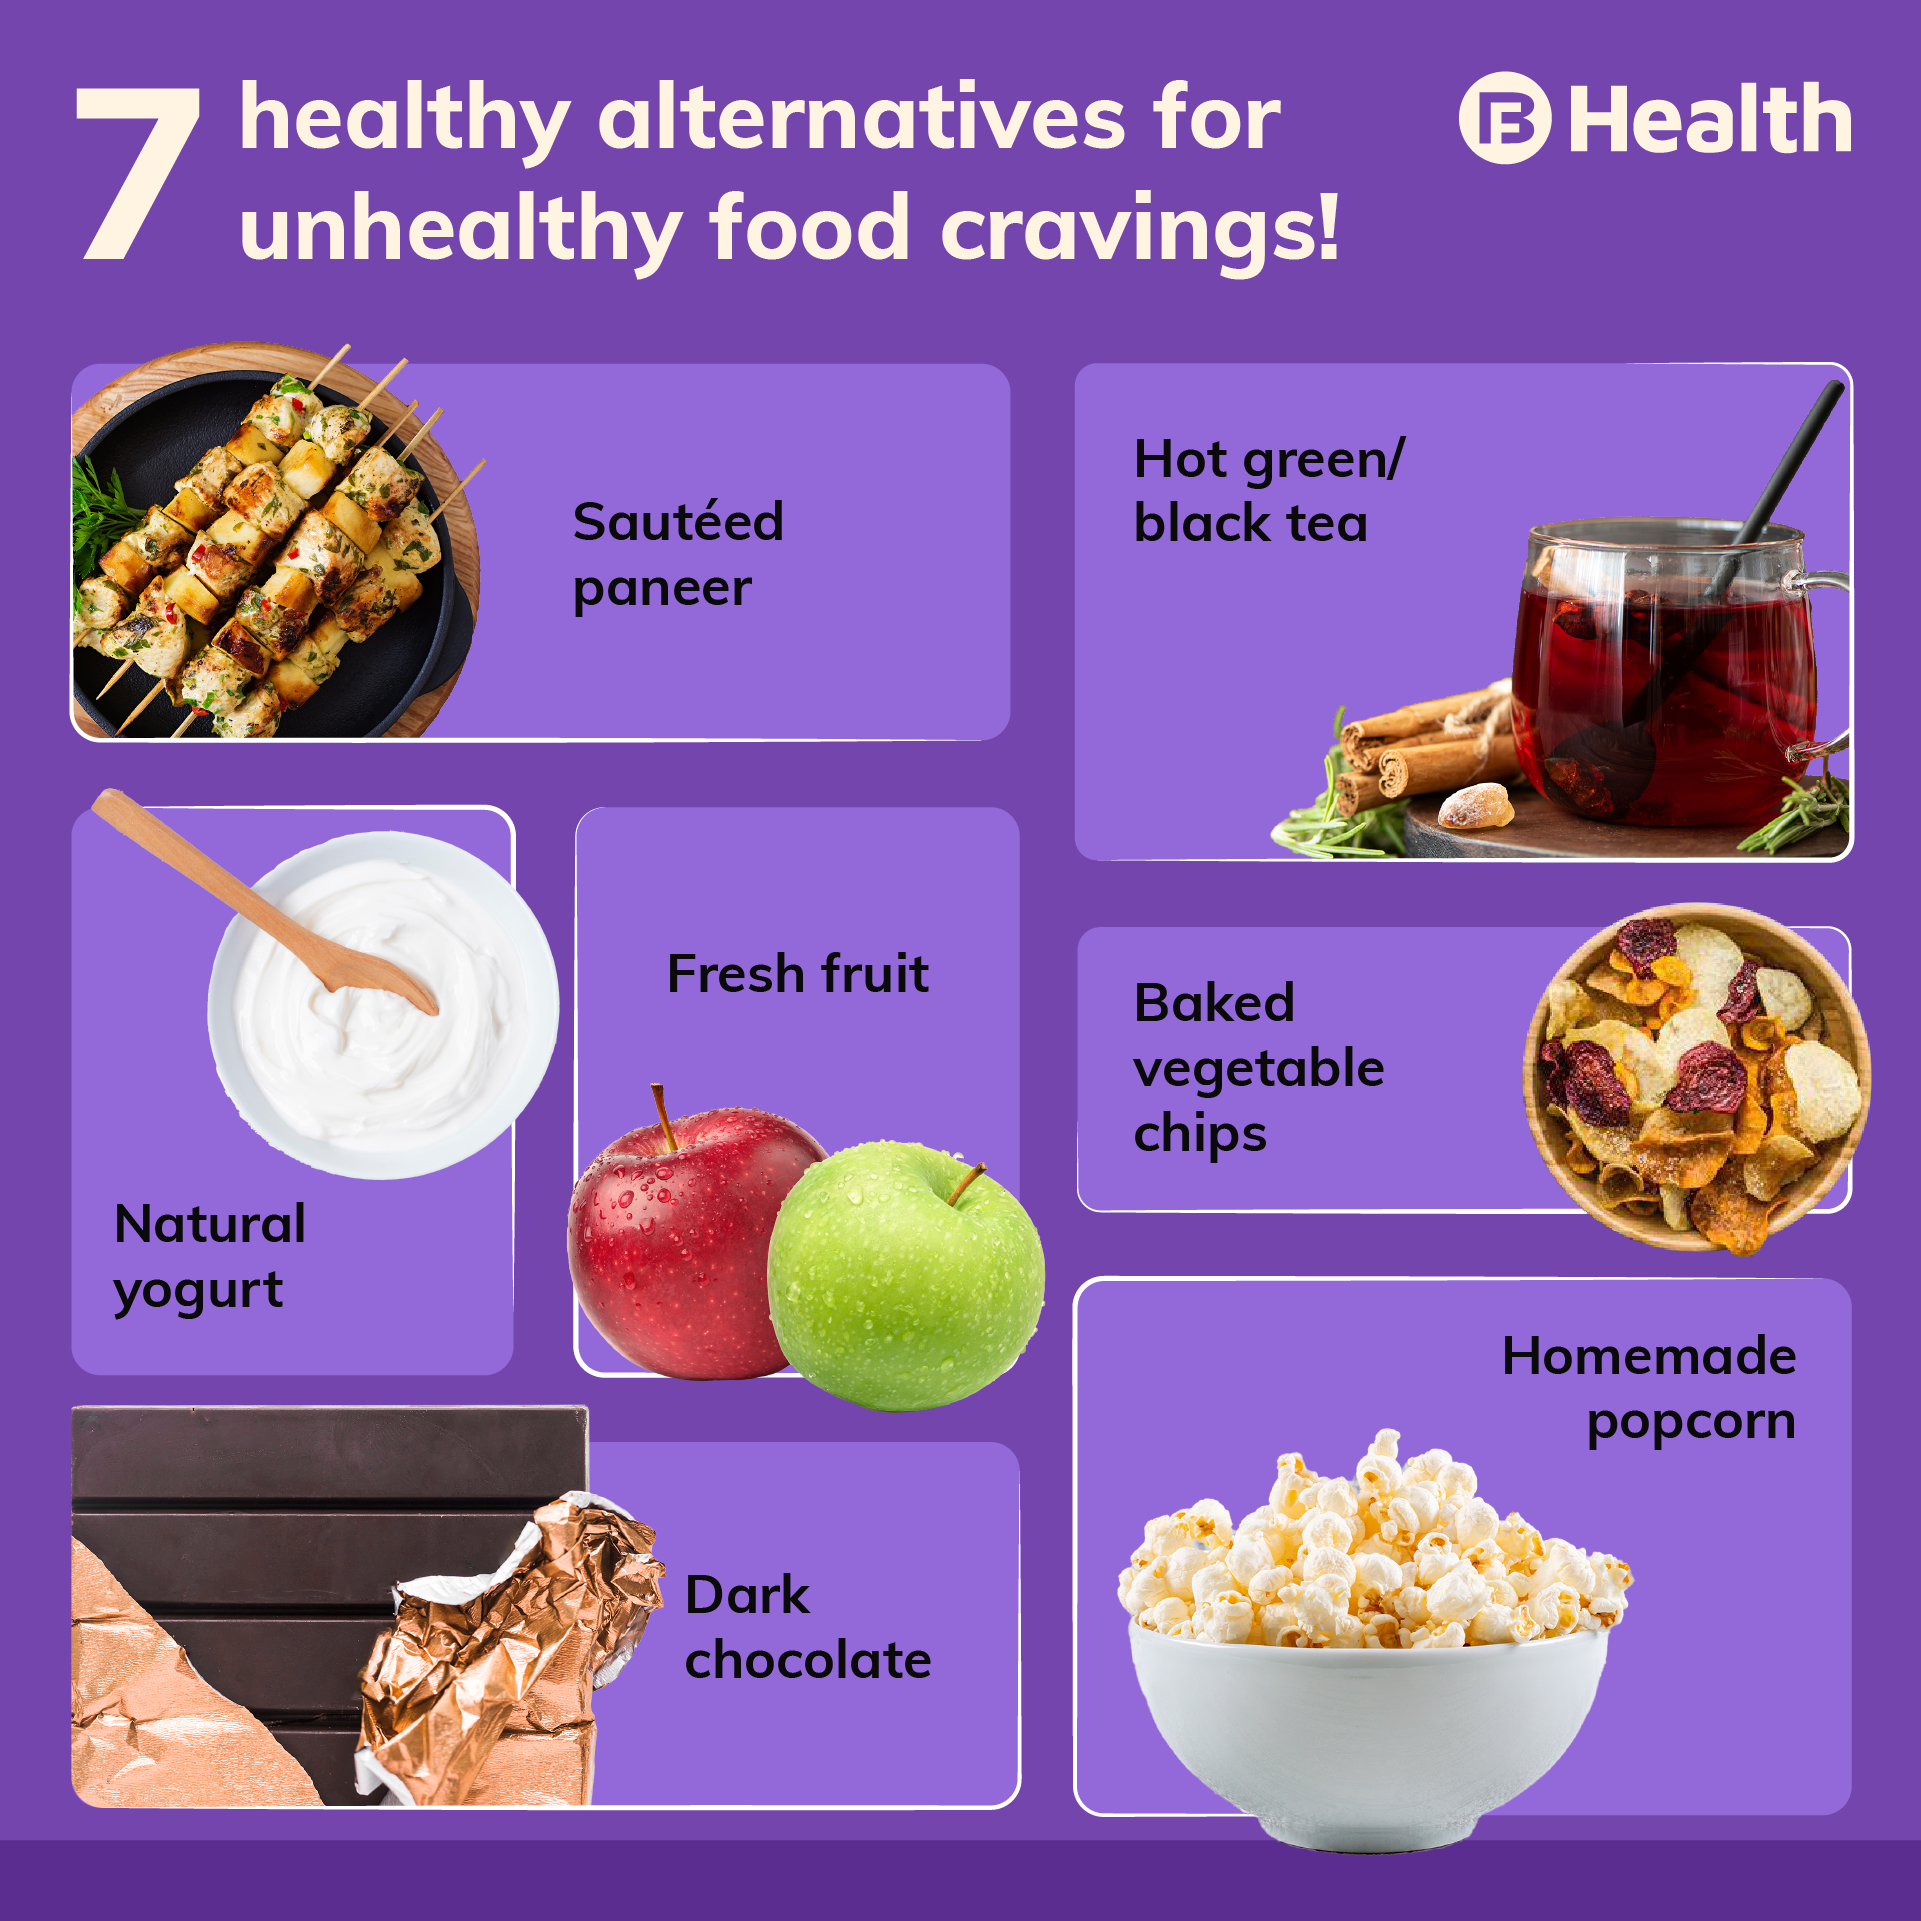 Control cravings for high-carb foods